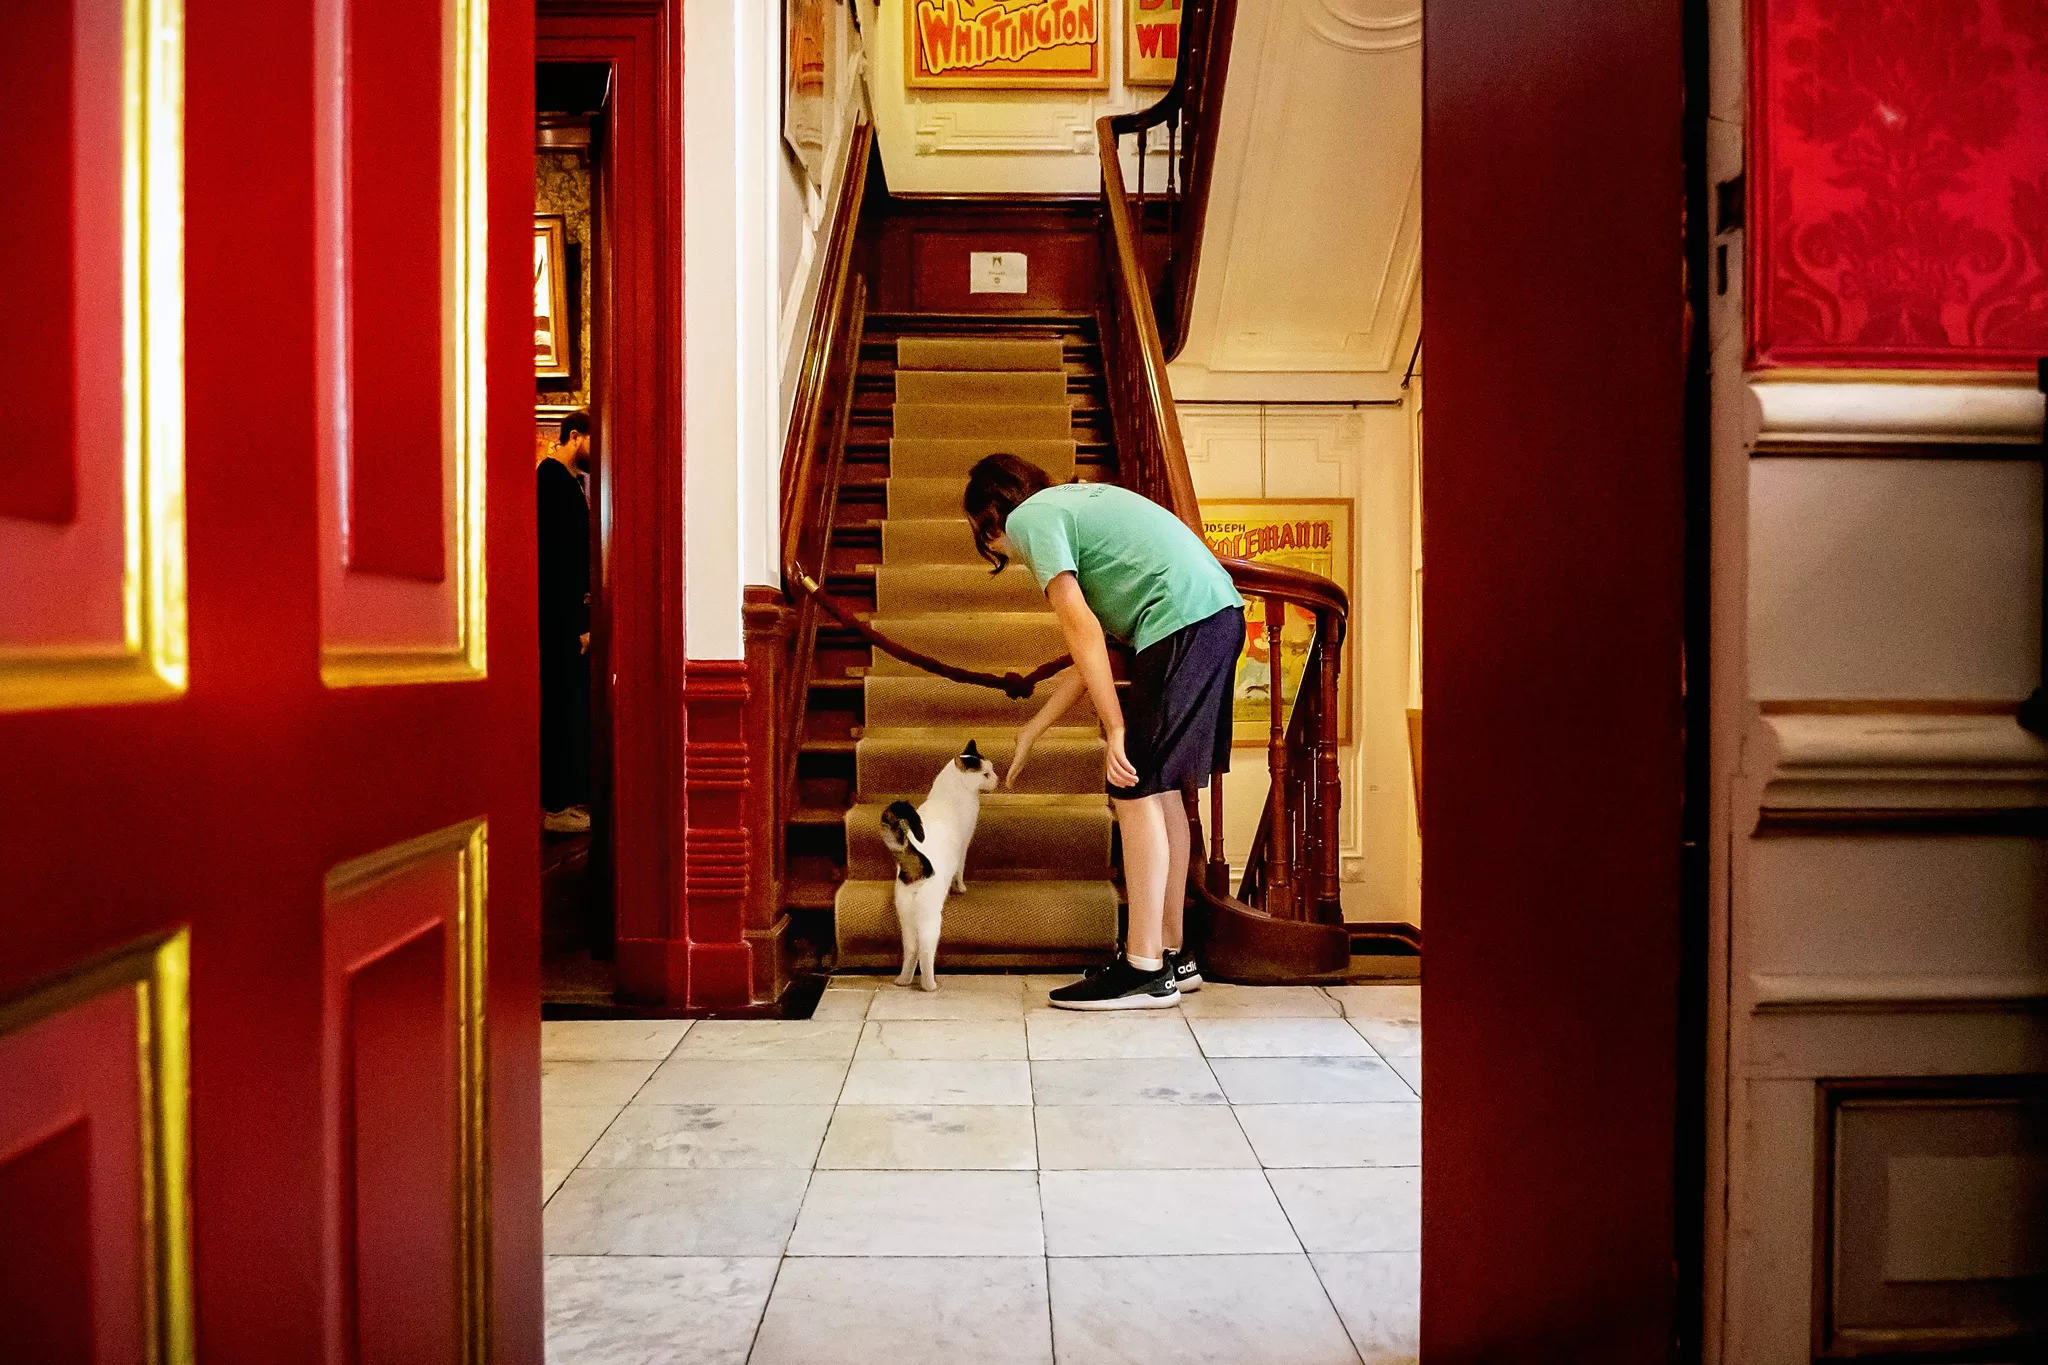 Inside kattenkabinet museum amsterdam. A photo of a boy petting a cat near the stairs.